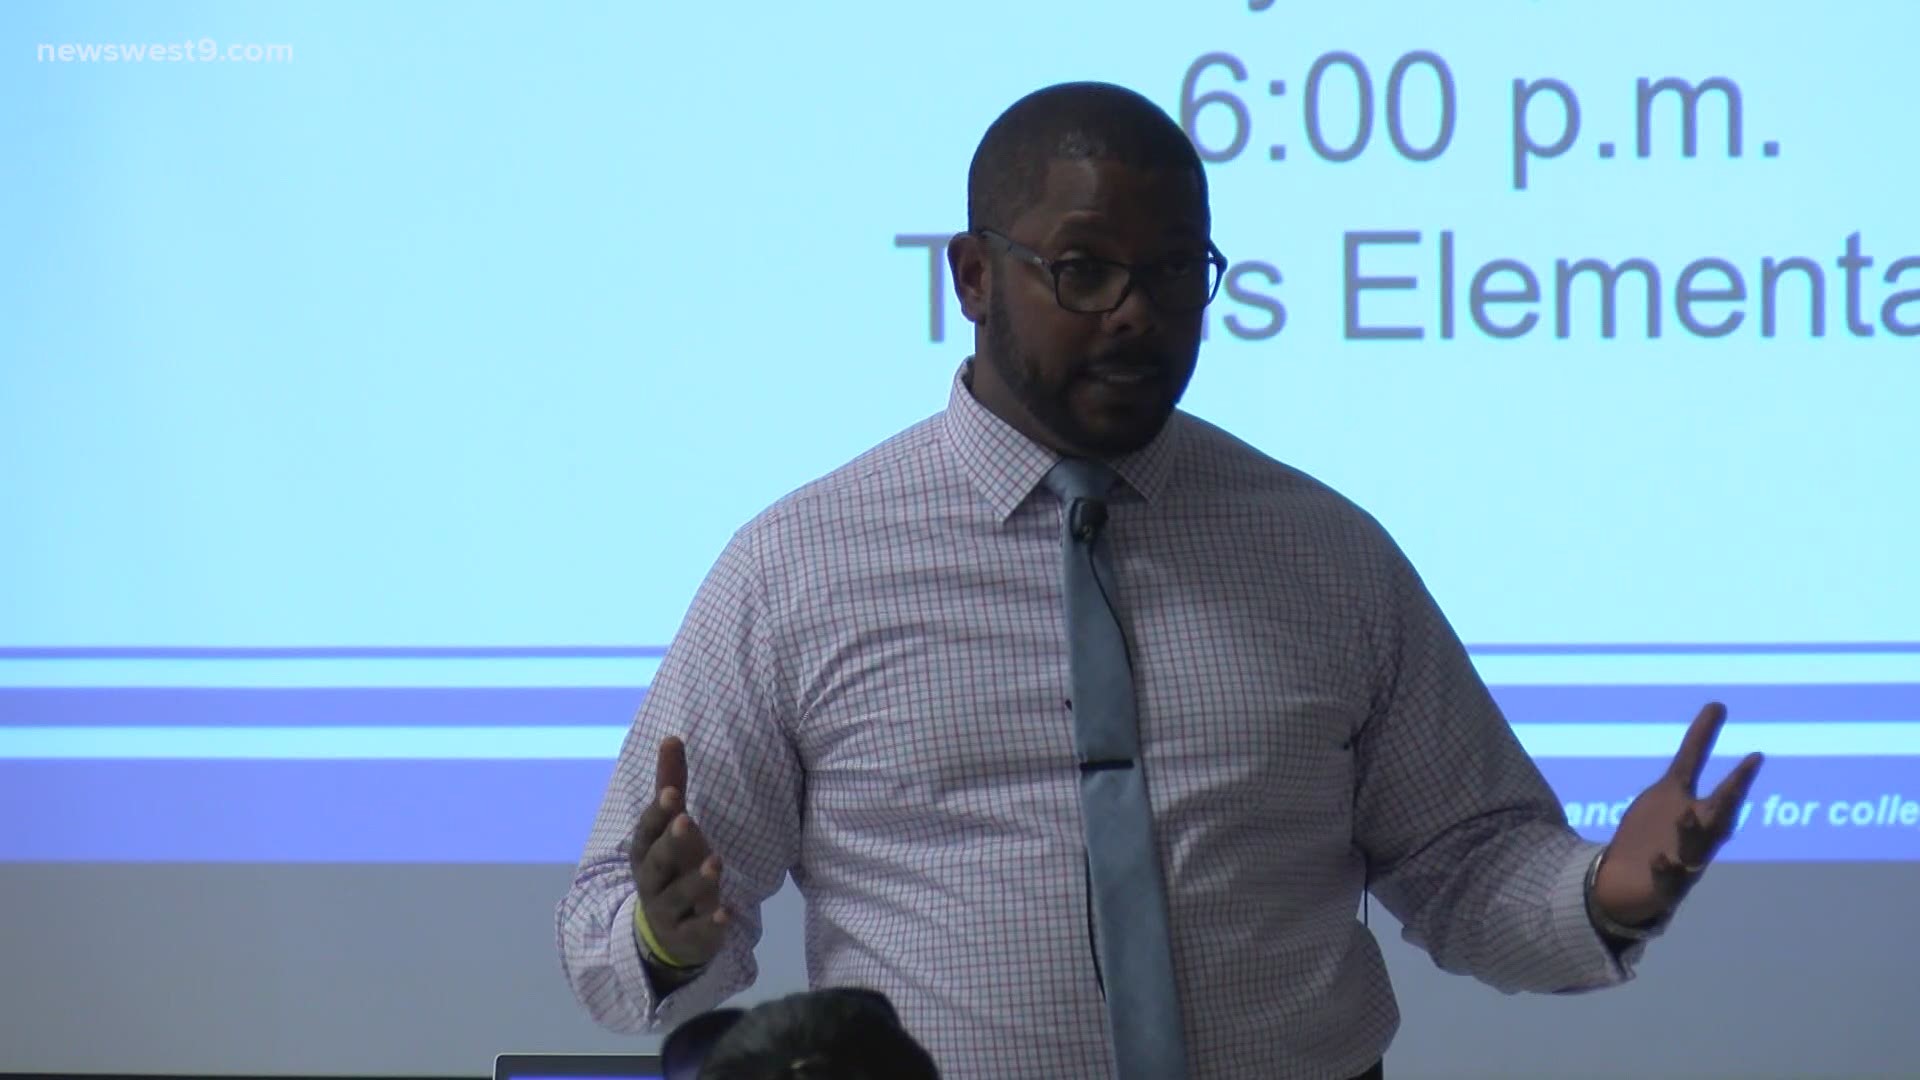 Riddick has requested an independent hearing, following the school board's vote to terminate his contract in August.